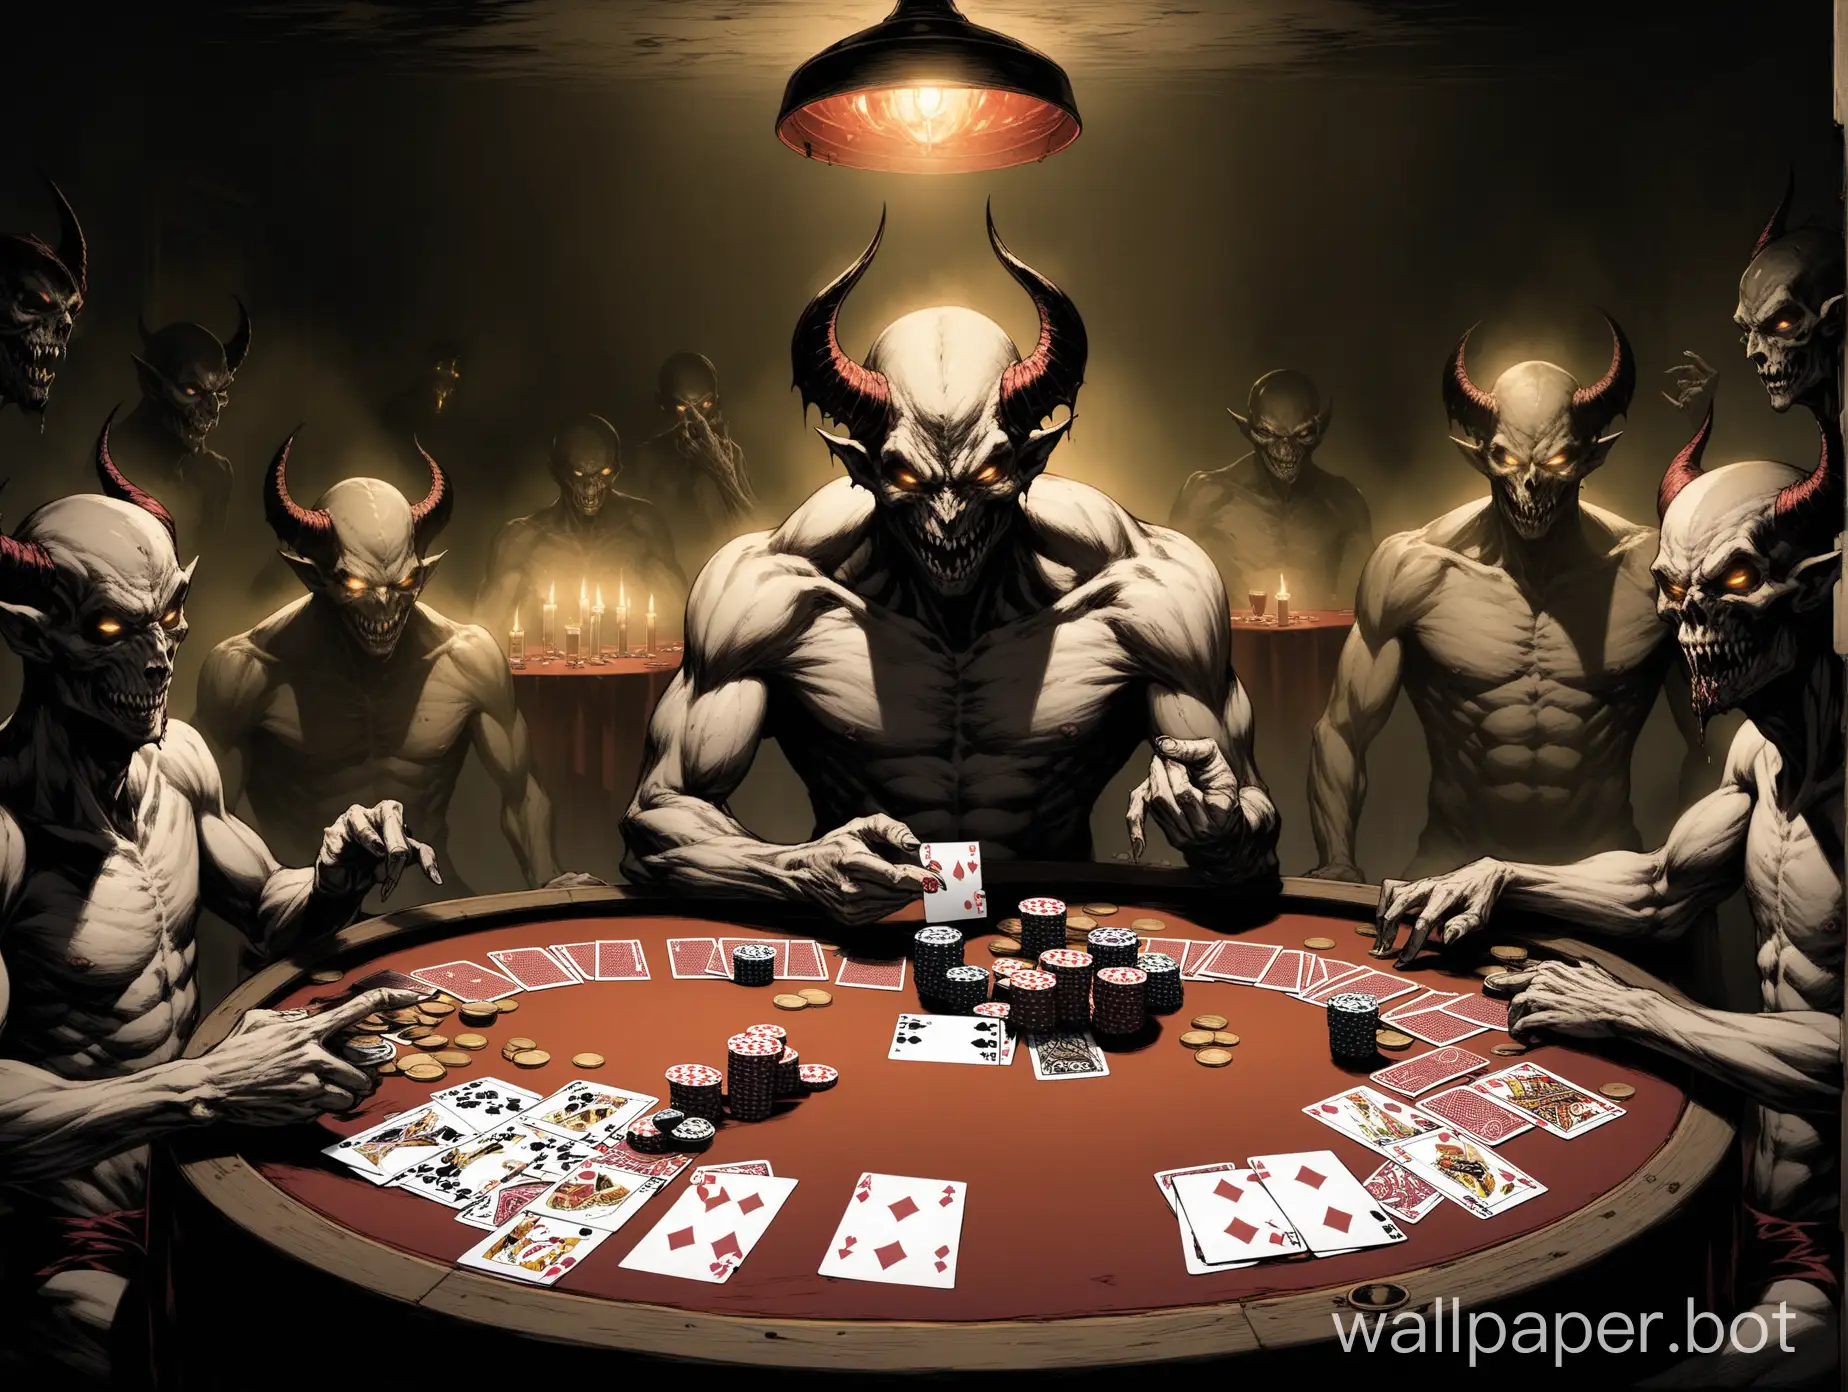 Twisted-Demons-of-Addiction-Gather-at-Poker-Table-in-Shadowy-Room